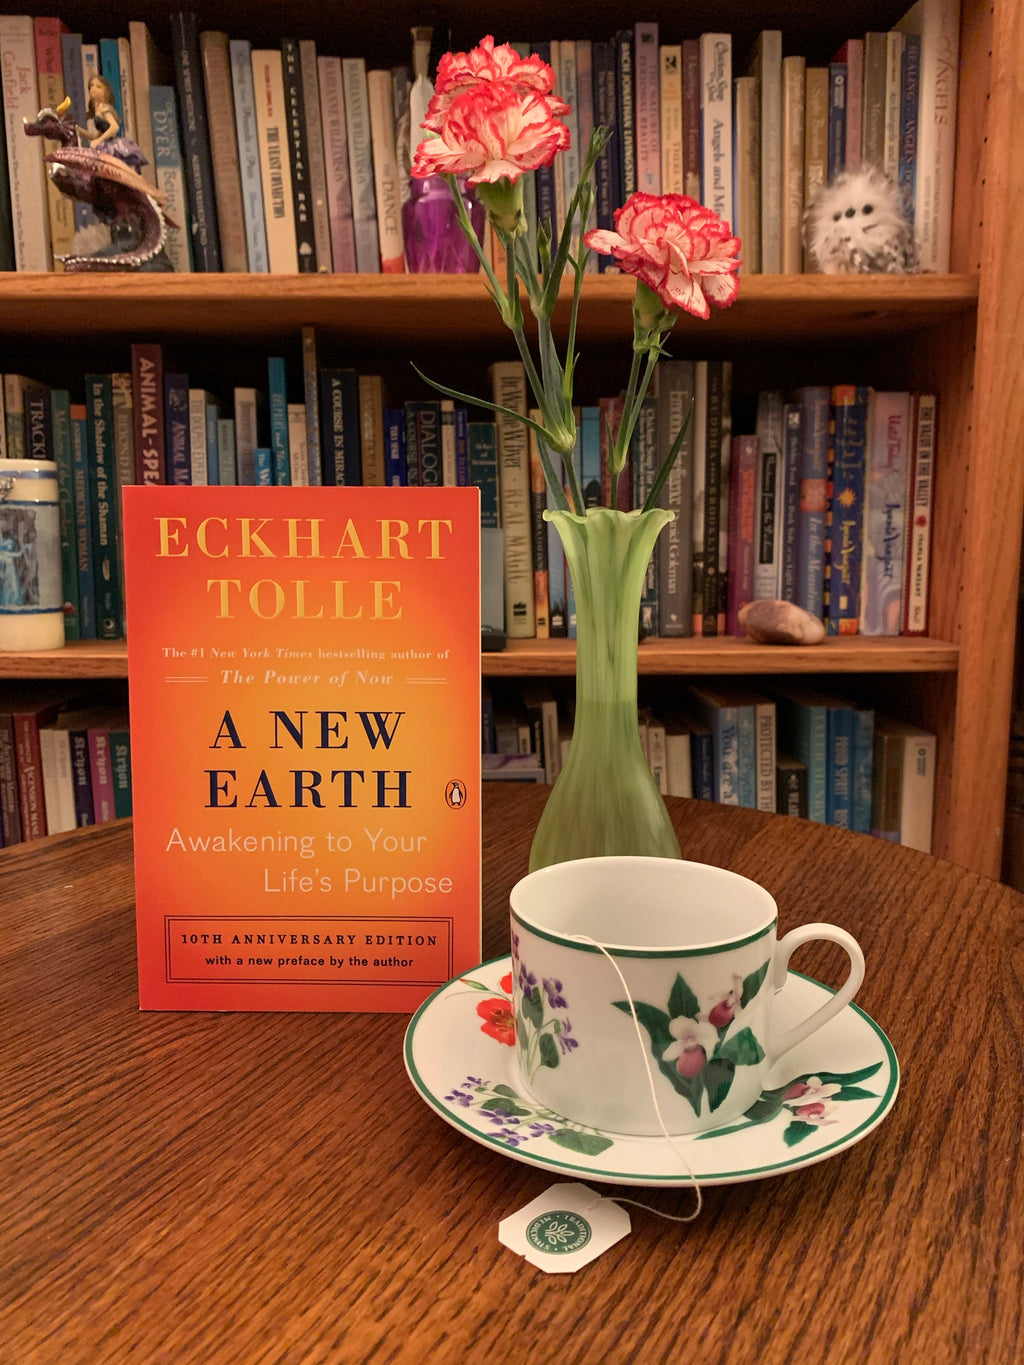 "A New Earth" by Eckhart Tolle. In this book Tolle expands on ideas from his first book The Power of Now - "powerful ideas to show how transcending our ego-based state of consciousness is not only essential to personal happiness, but also the key to ending conflict and suffering throughout the world. Tolle describes how our attachment to the ego creates the dysfunction. His message is simple - stay conscious - in the present moment and don't allow the mind to lead you away from it. Cost is $17.00